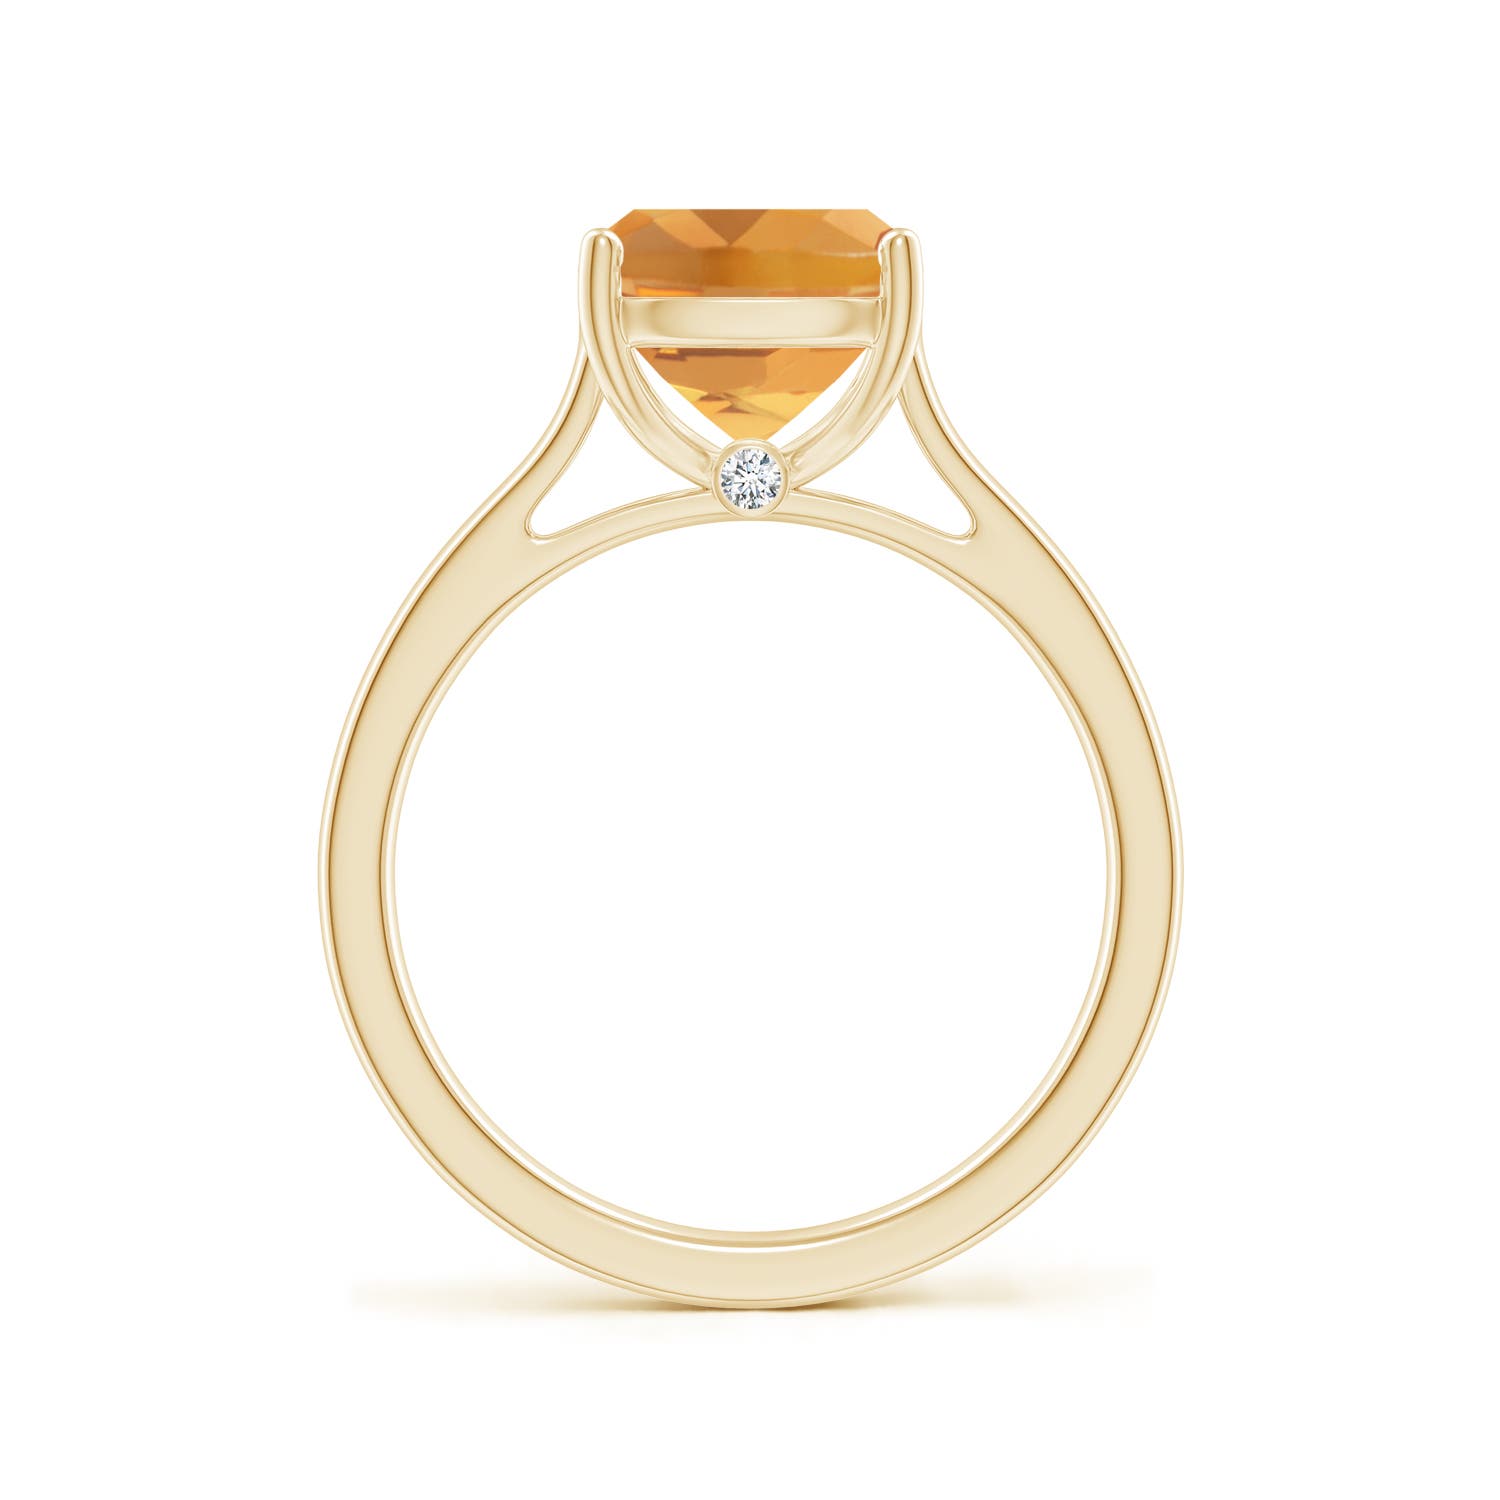 A - Citrine / 2.67 CT / 14 KT Yellow Gold